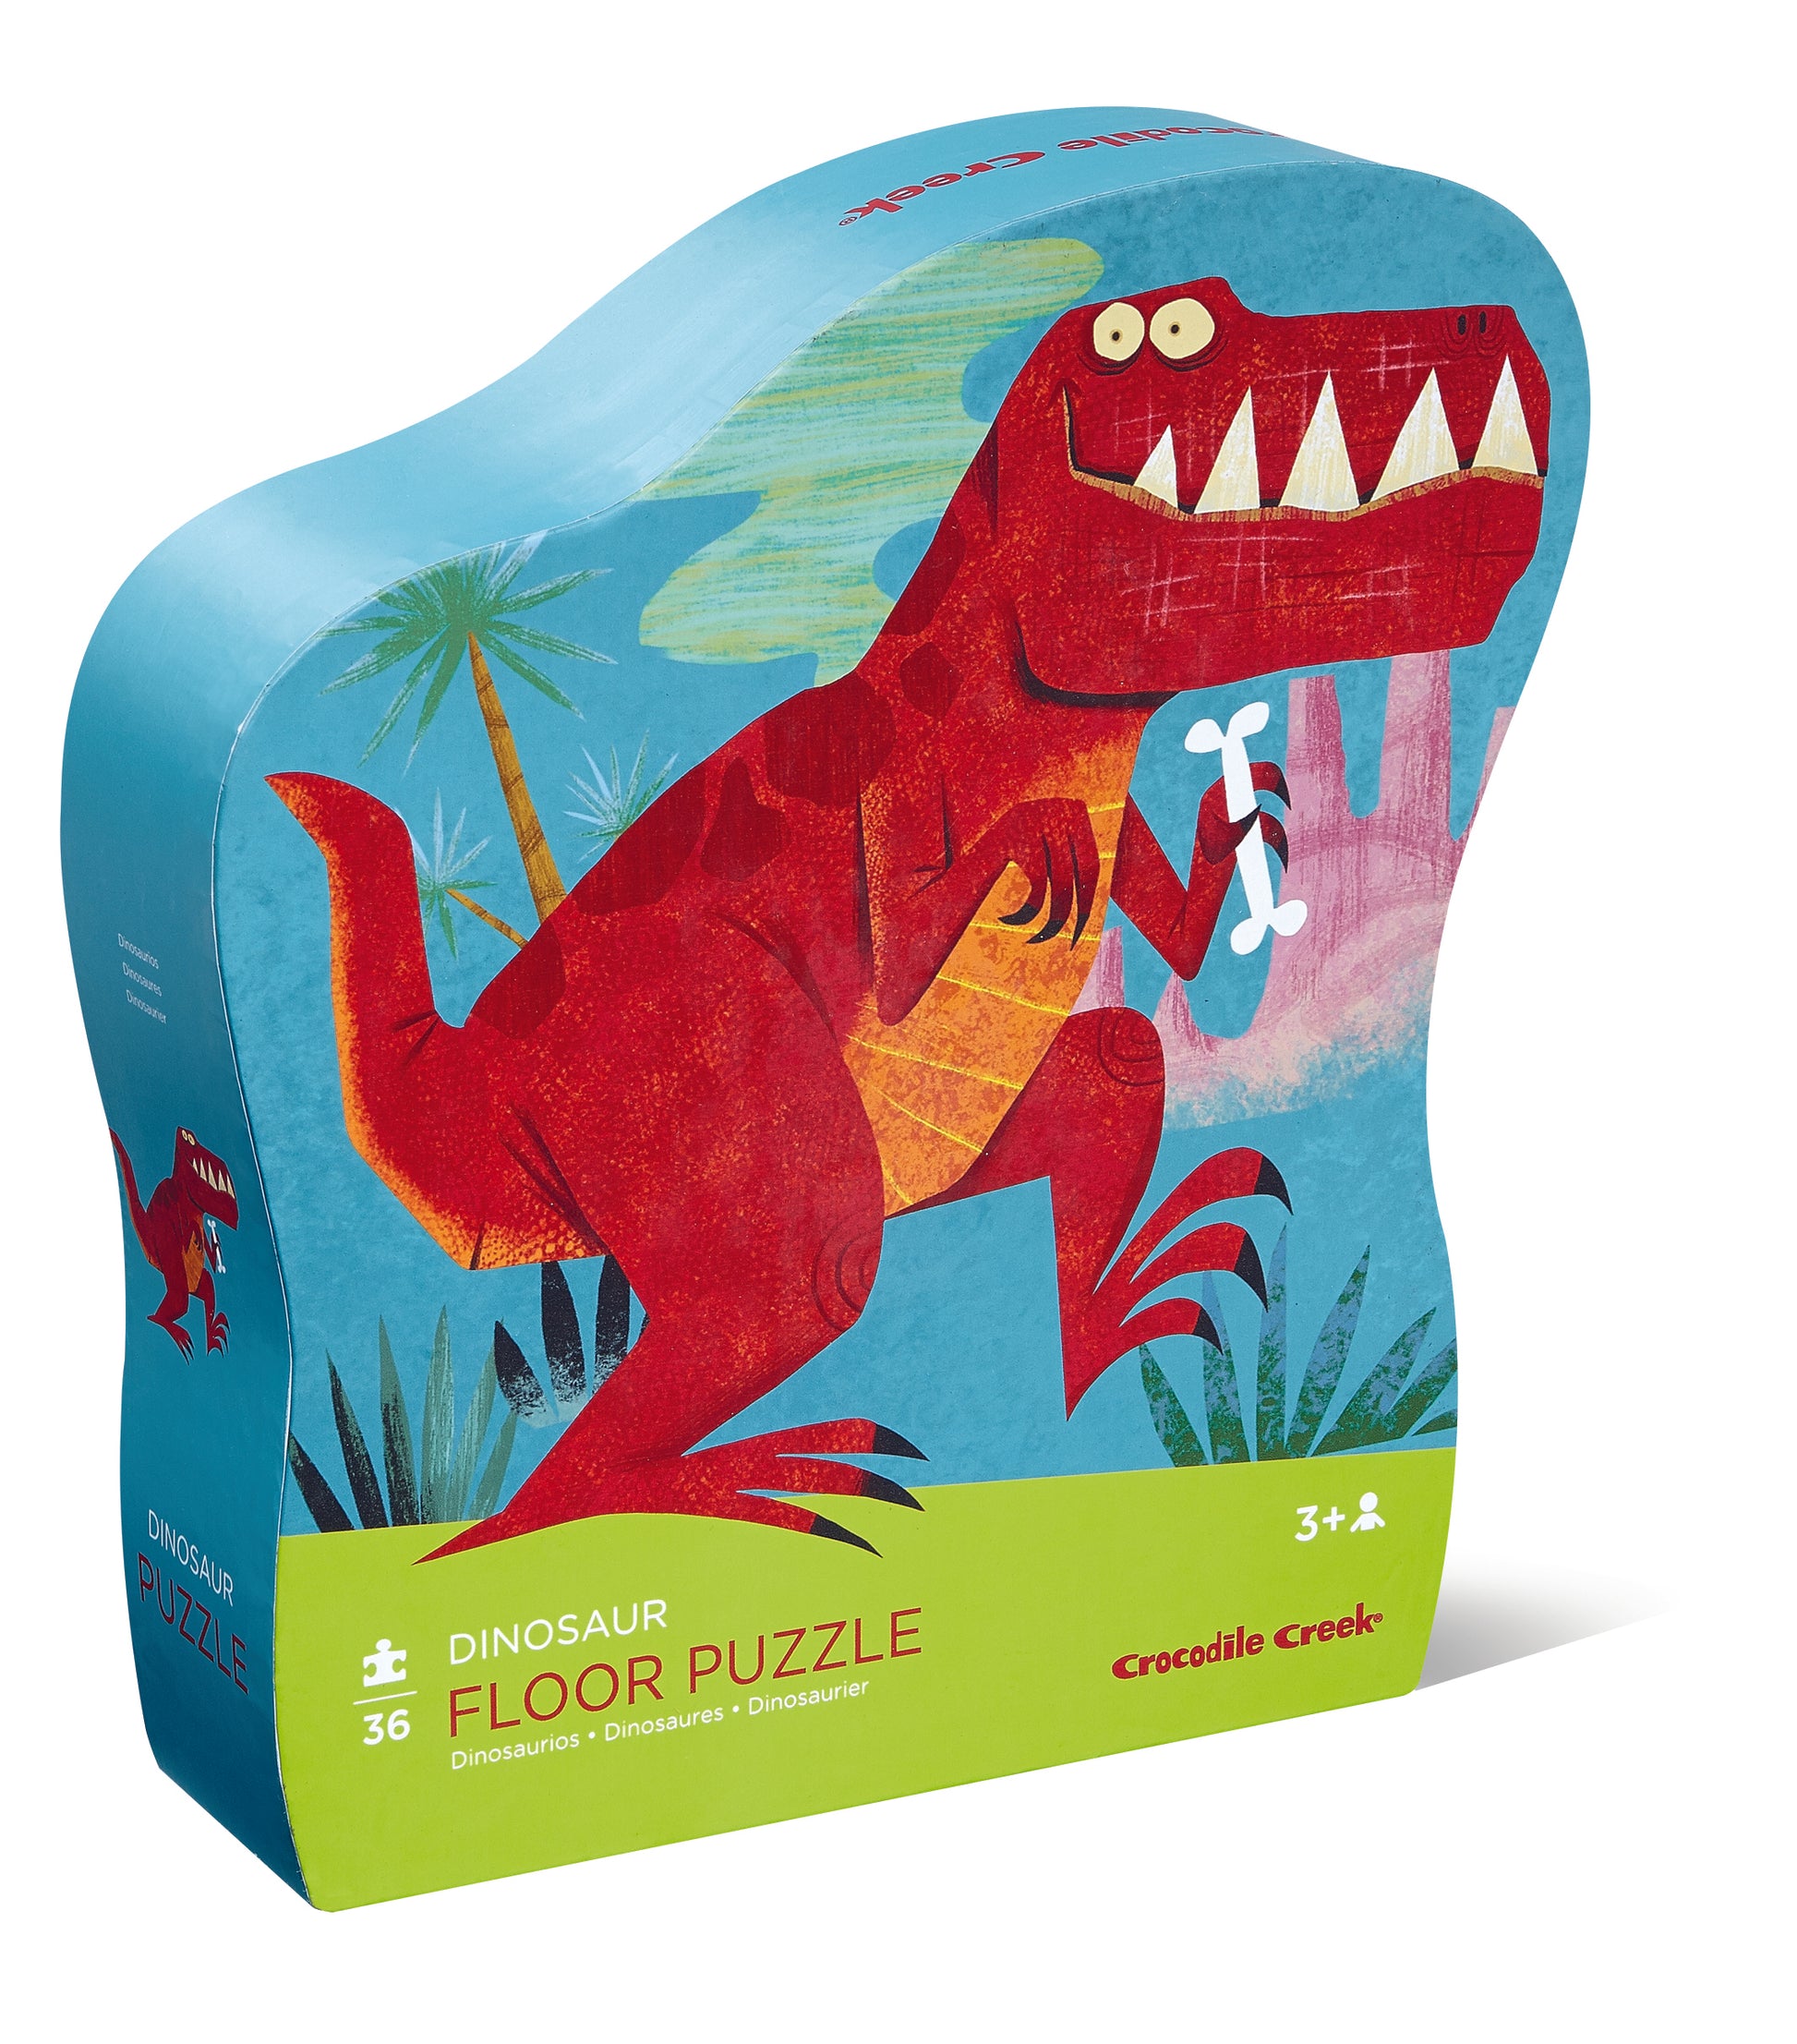 Crocodile Creek SHaped Box Puzzle Dinosaur 36pc quality puzzle for kids eco friendly The Toy Wagon